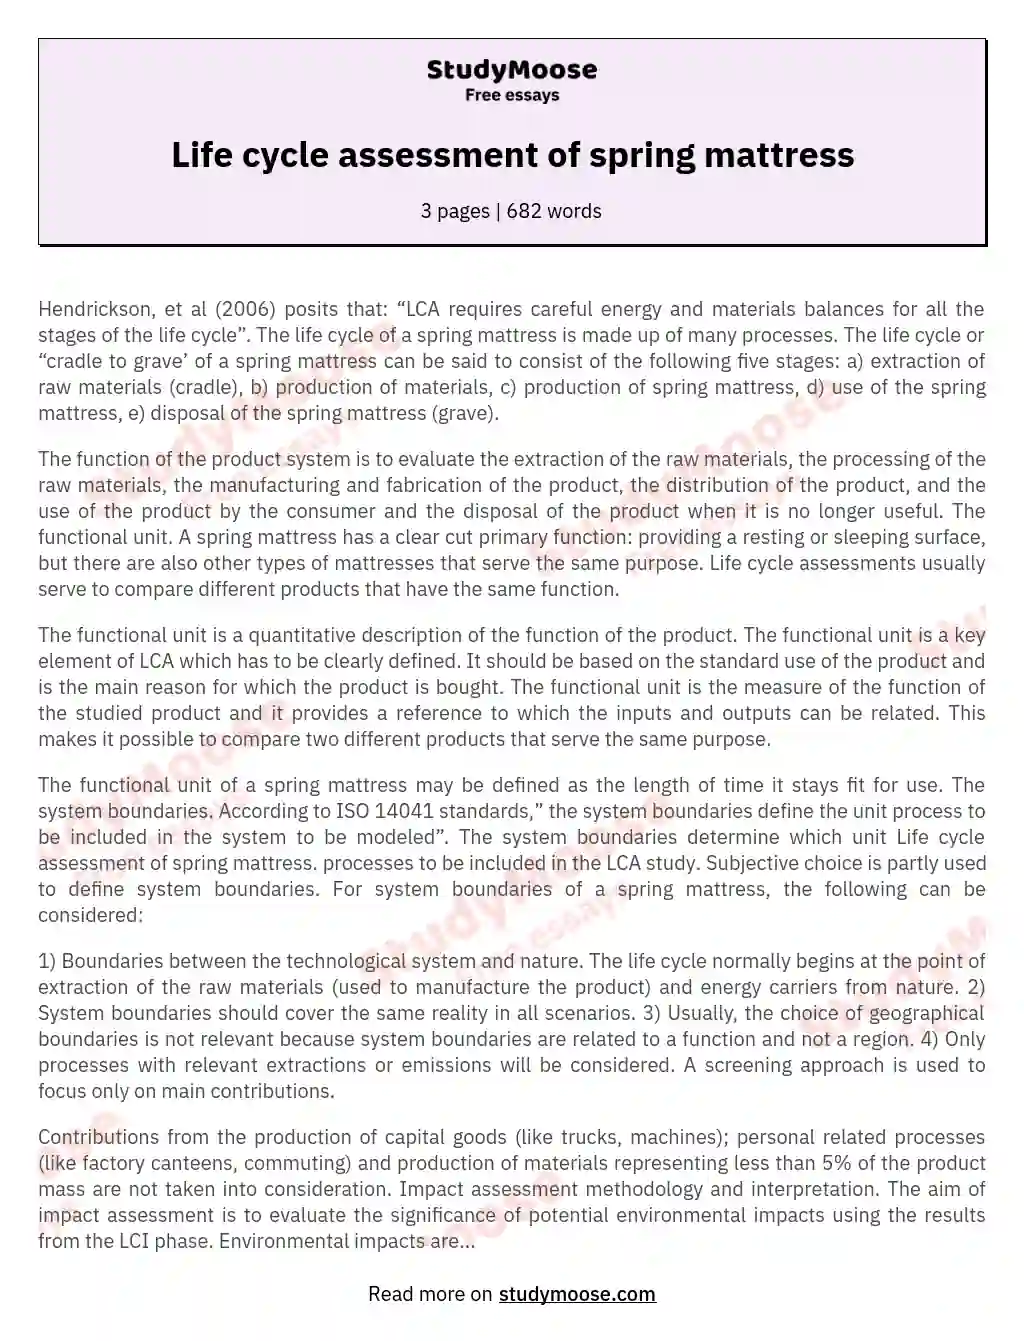 Life cycle assessment of spring mattress essay